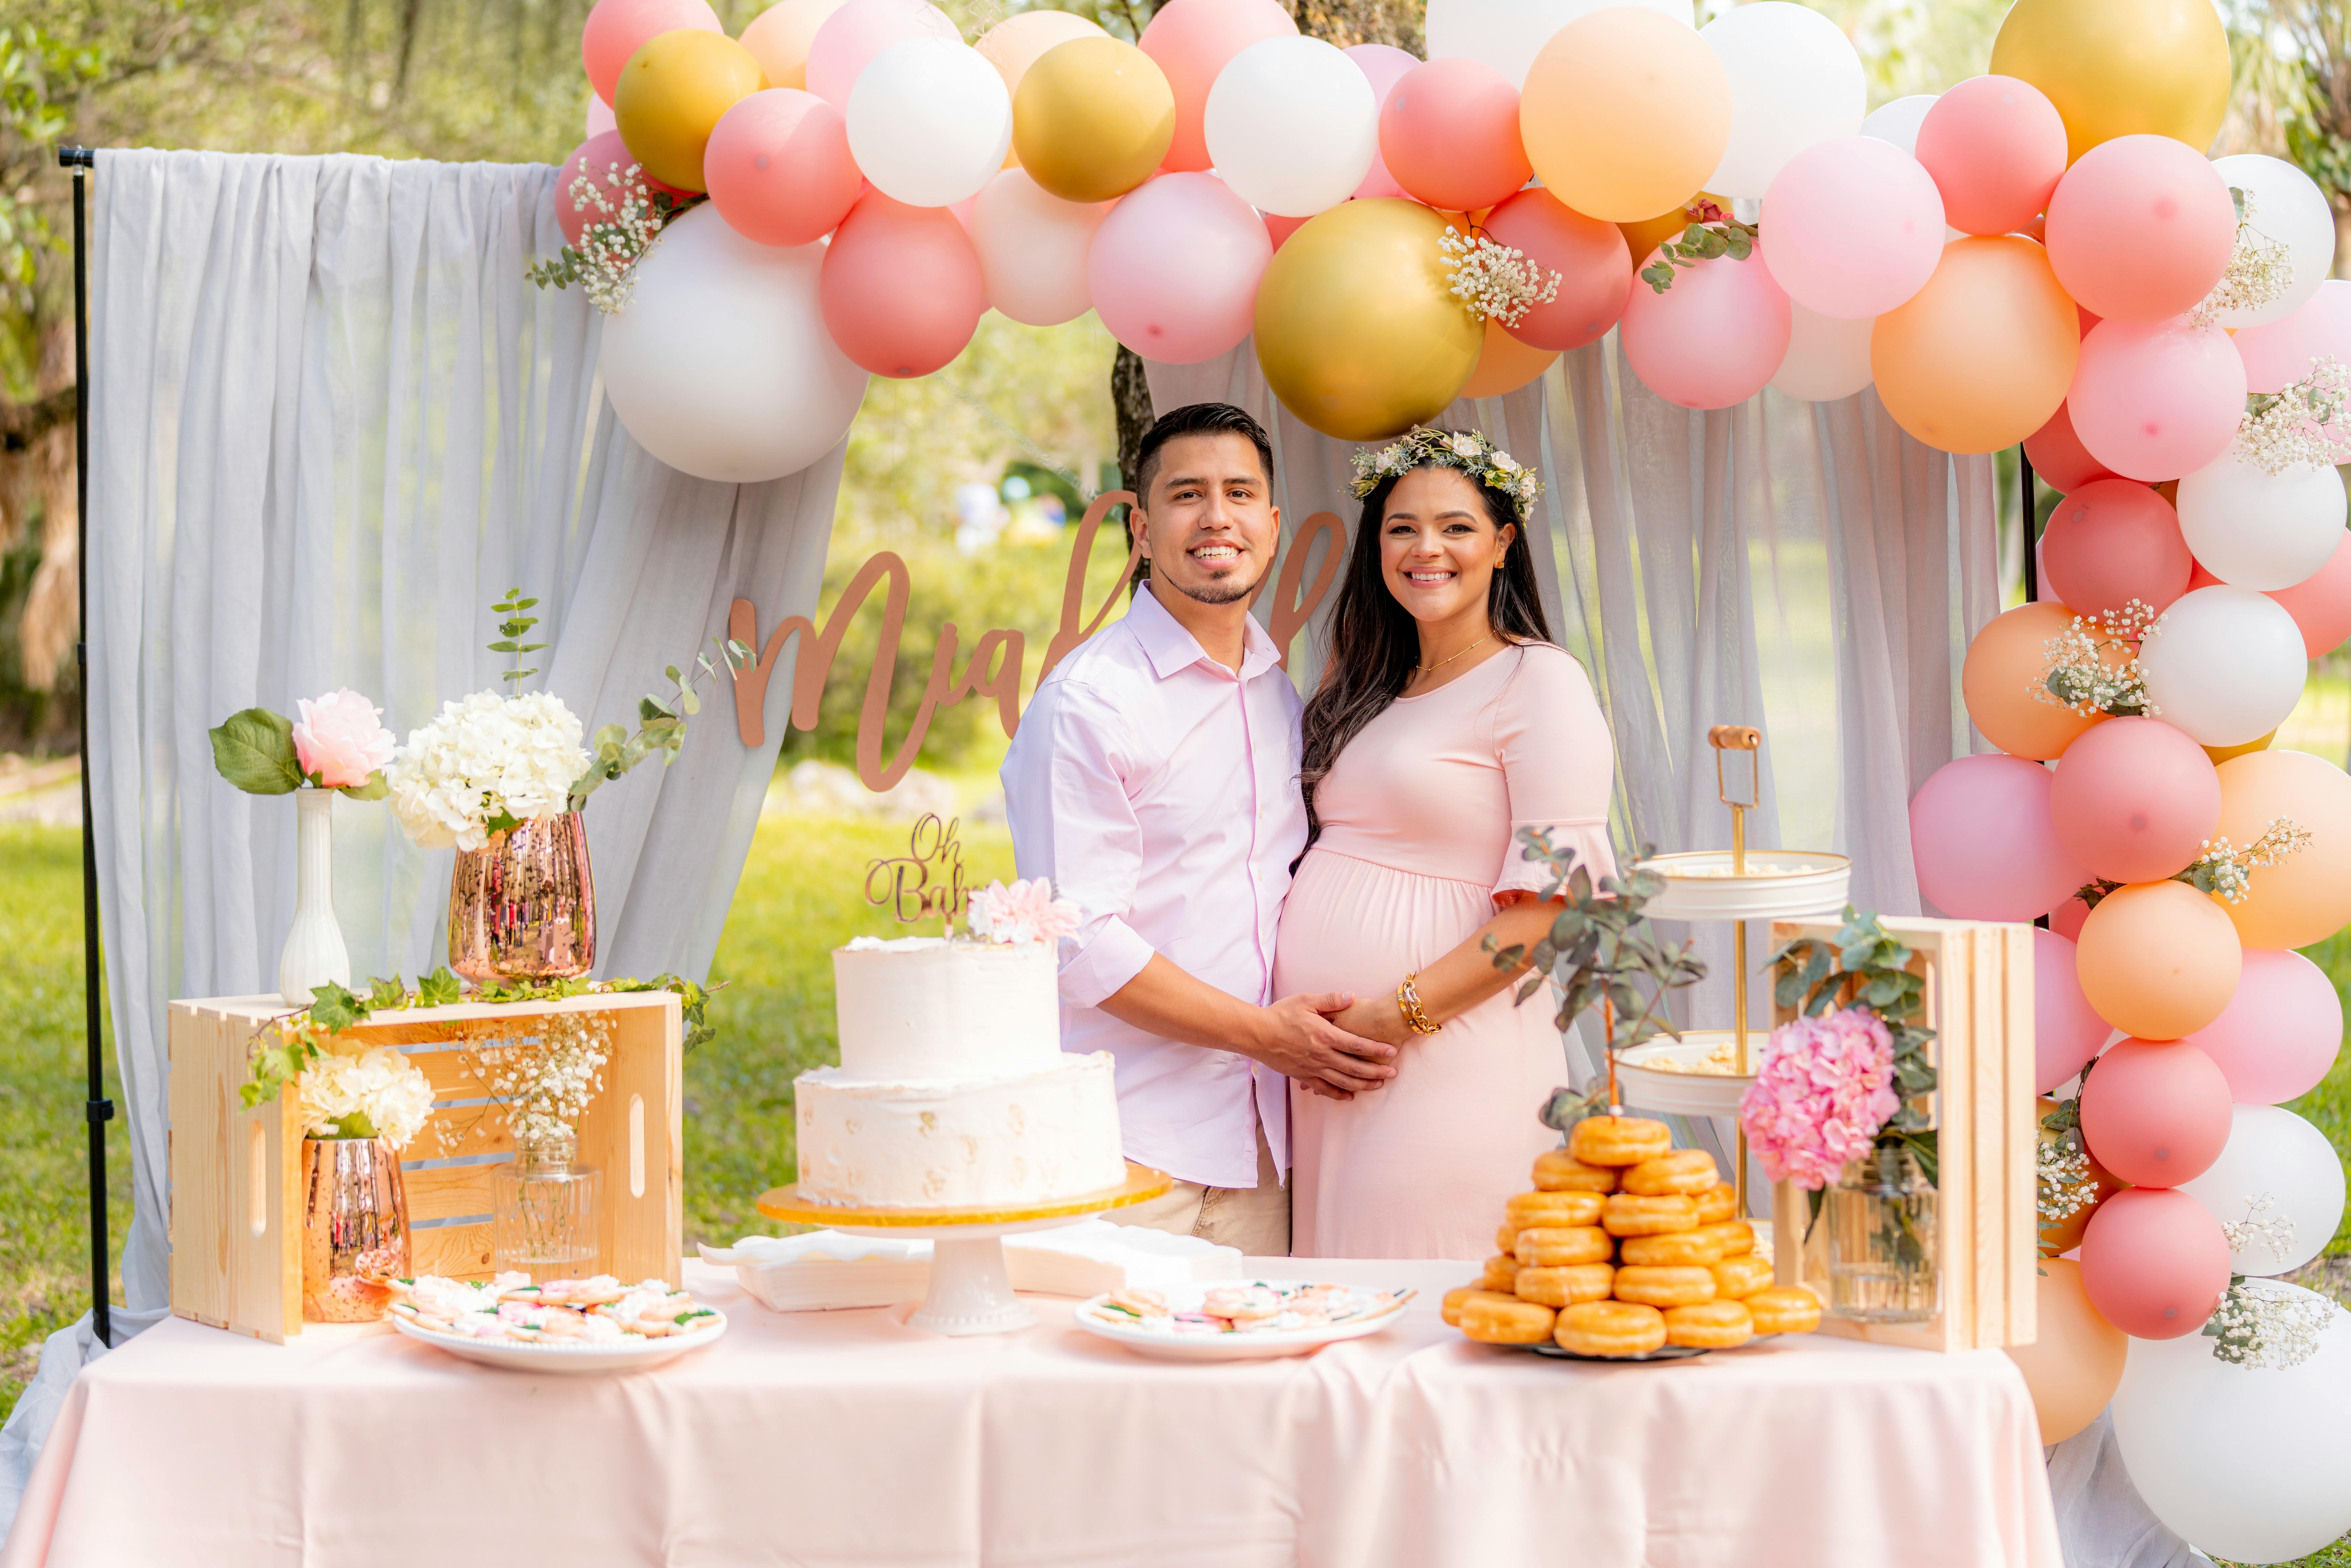 7 Baby Shower Photoshoot Poses that Capture the Joy of Parenthood